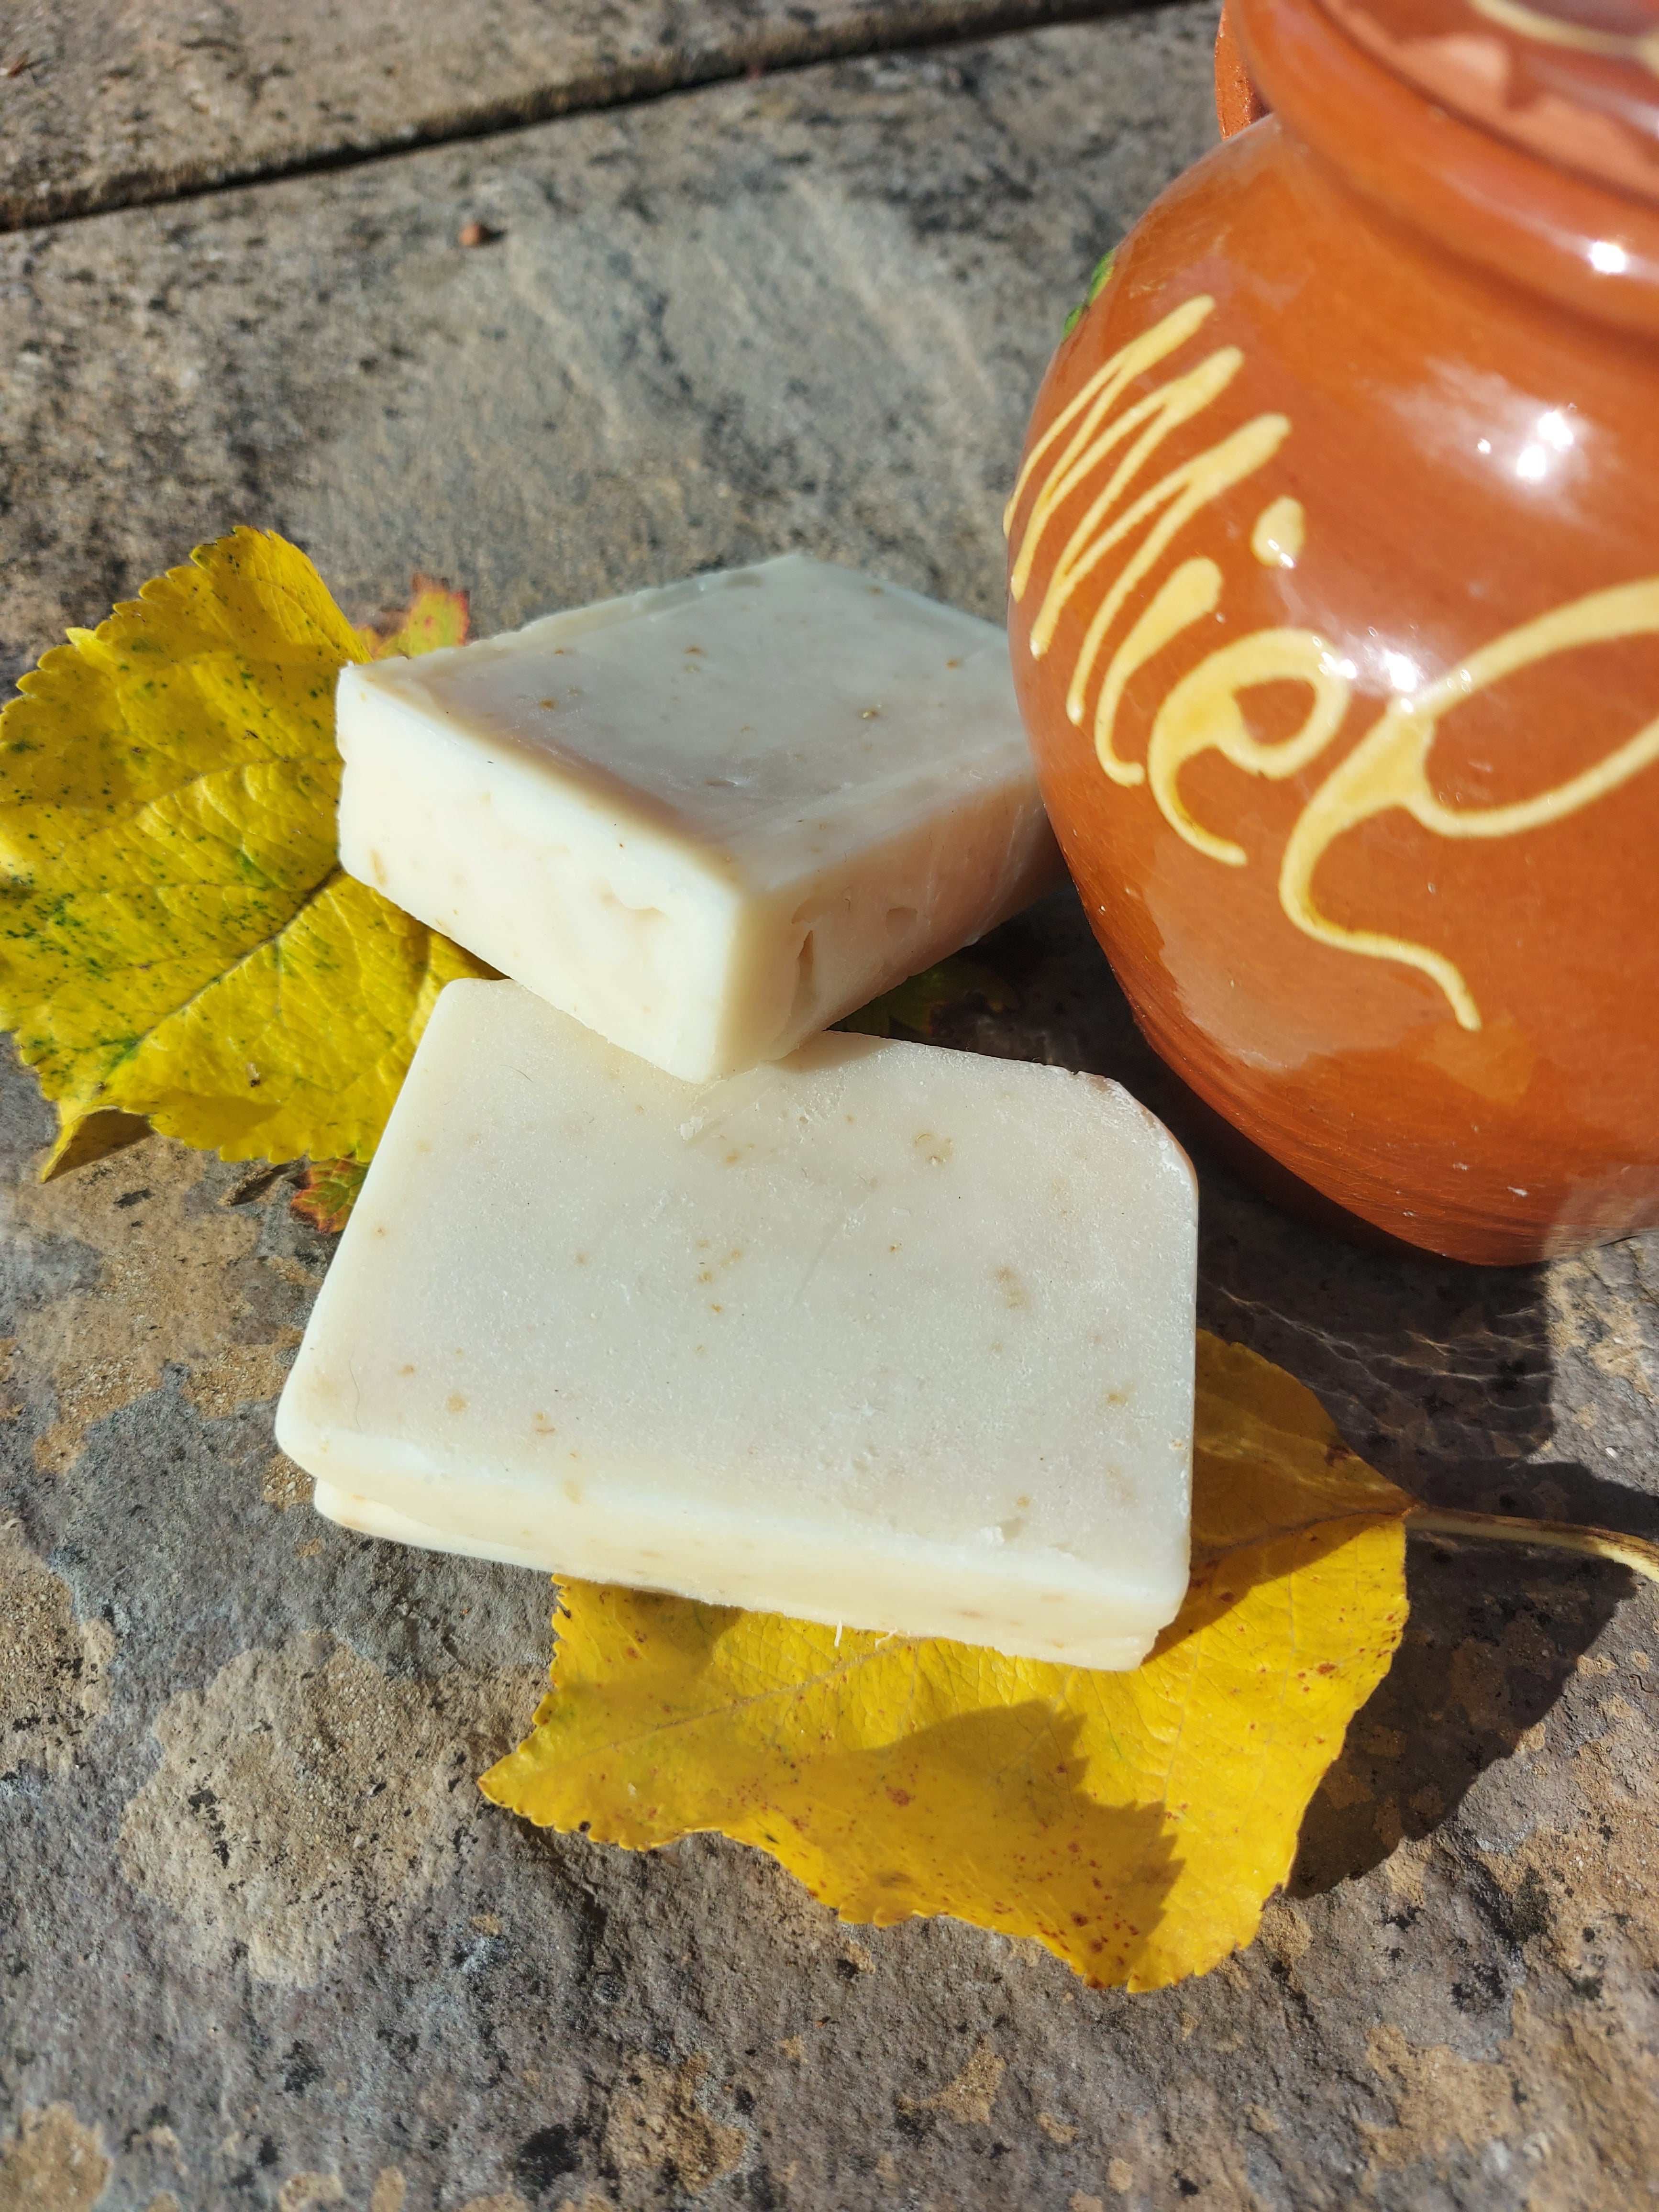 Moisturising Mango Butter Honey and Oatmeal soap with honey from our own bees. Hard soap which lathers well and is gently exfoliating